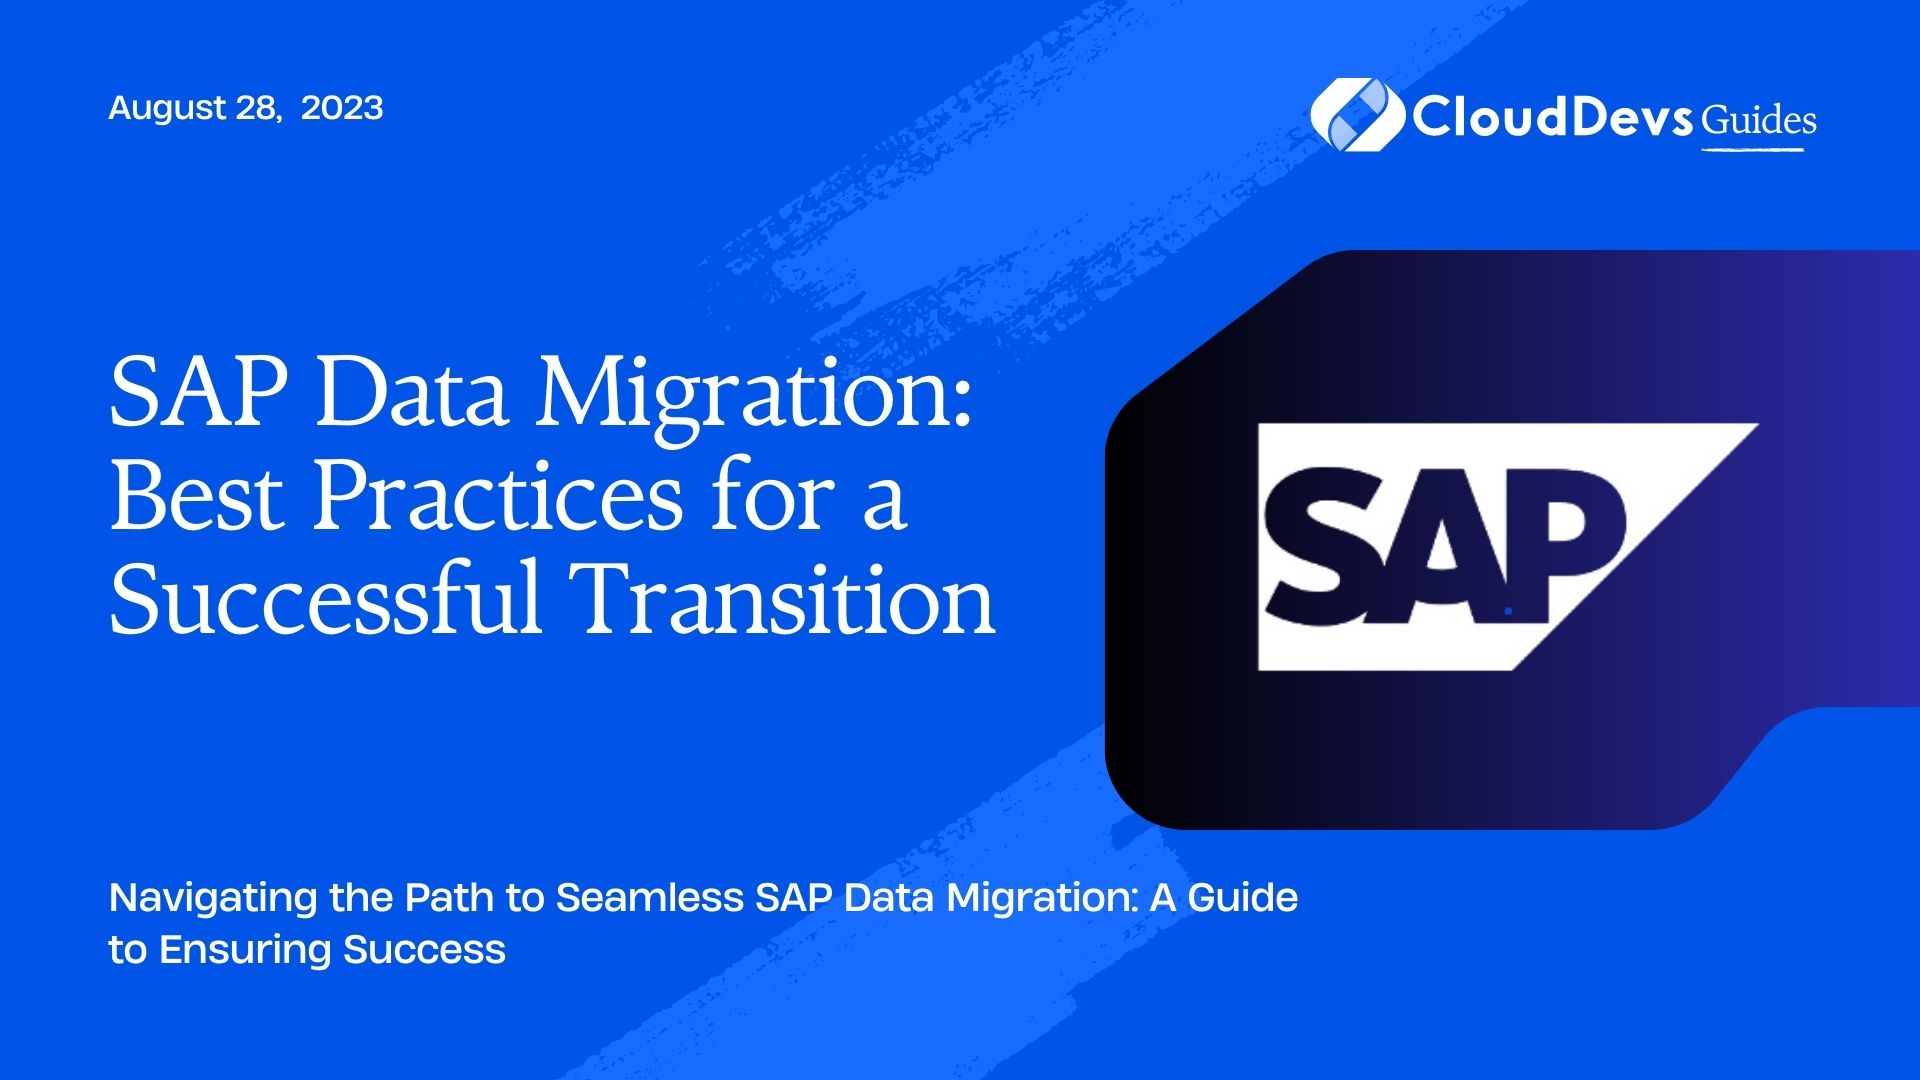 SAP Data Migration: Best Practices for a Successful Transition